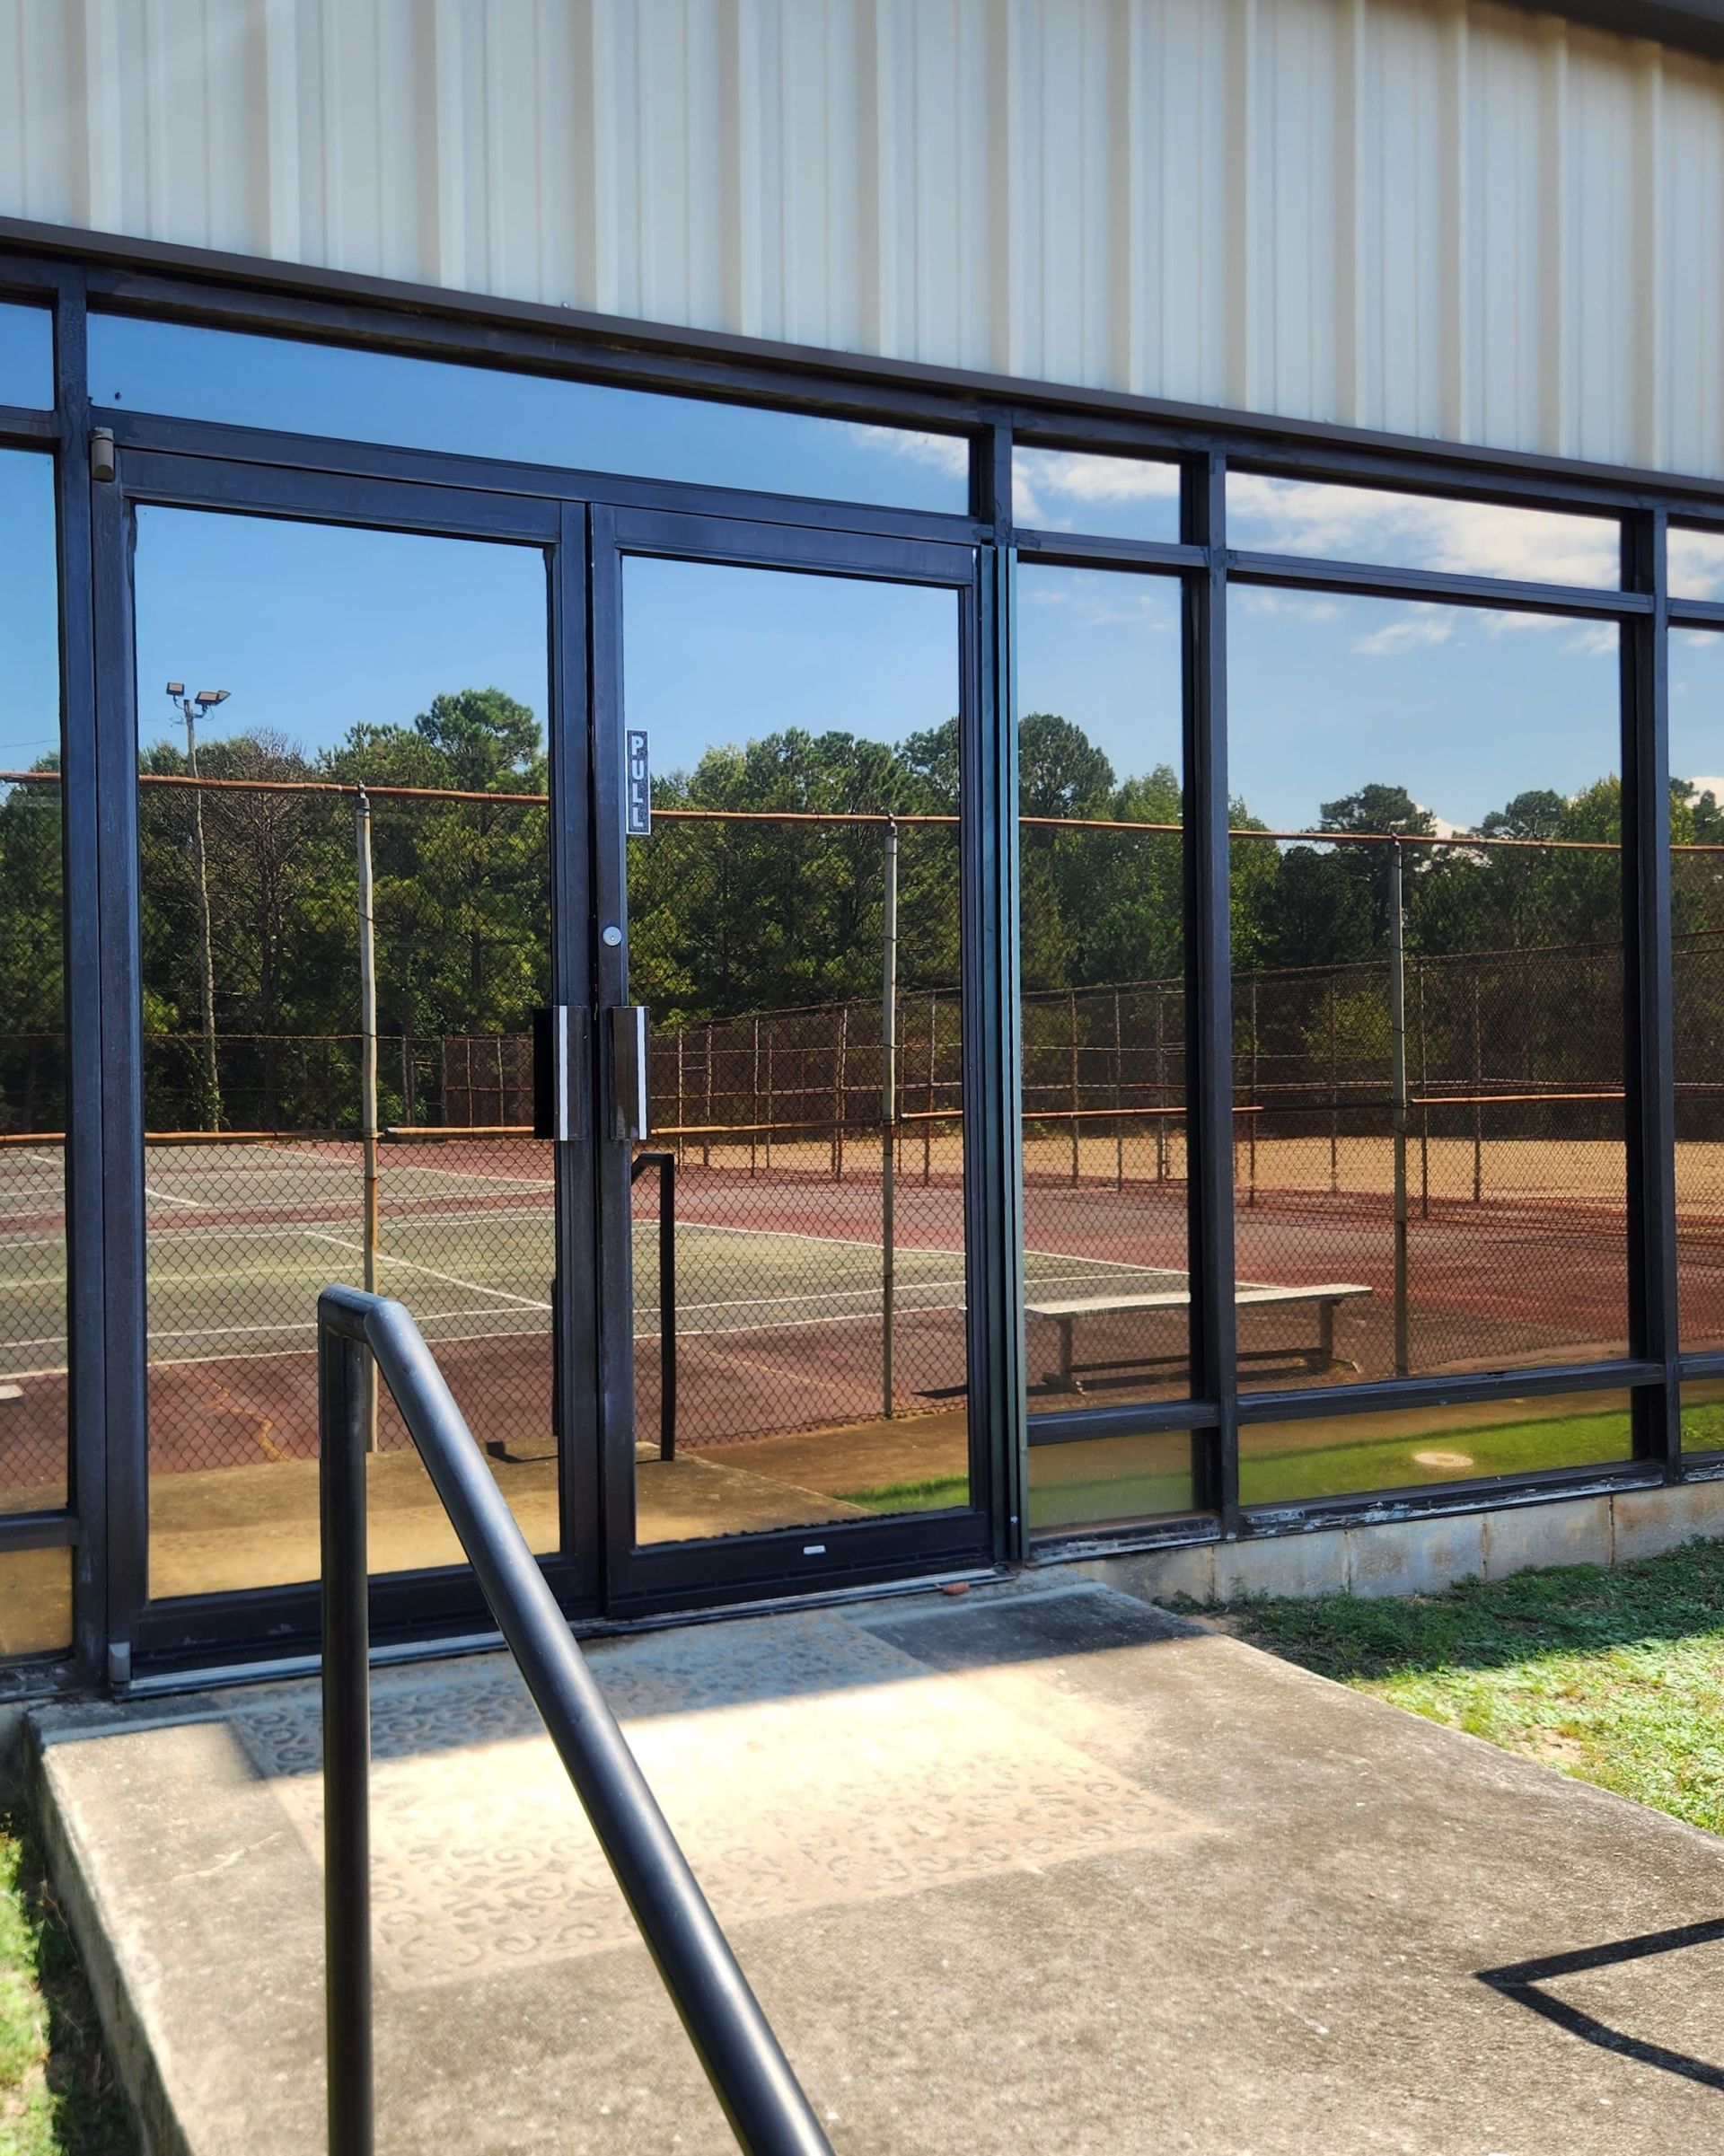 professional SPF tinting service adding unmatched efficiency with modern benefits and fresh new look appeal to gym windows. New energy efficient windows don't compare to the heat blocking performance of spf ultra tint professionally installed in Prattville AL